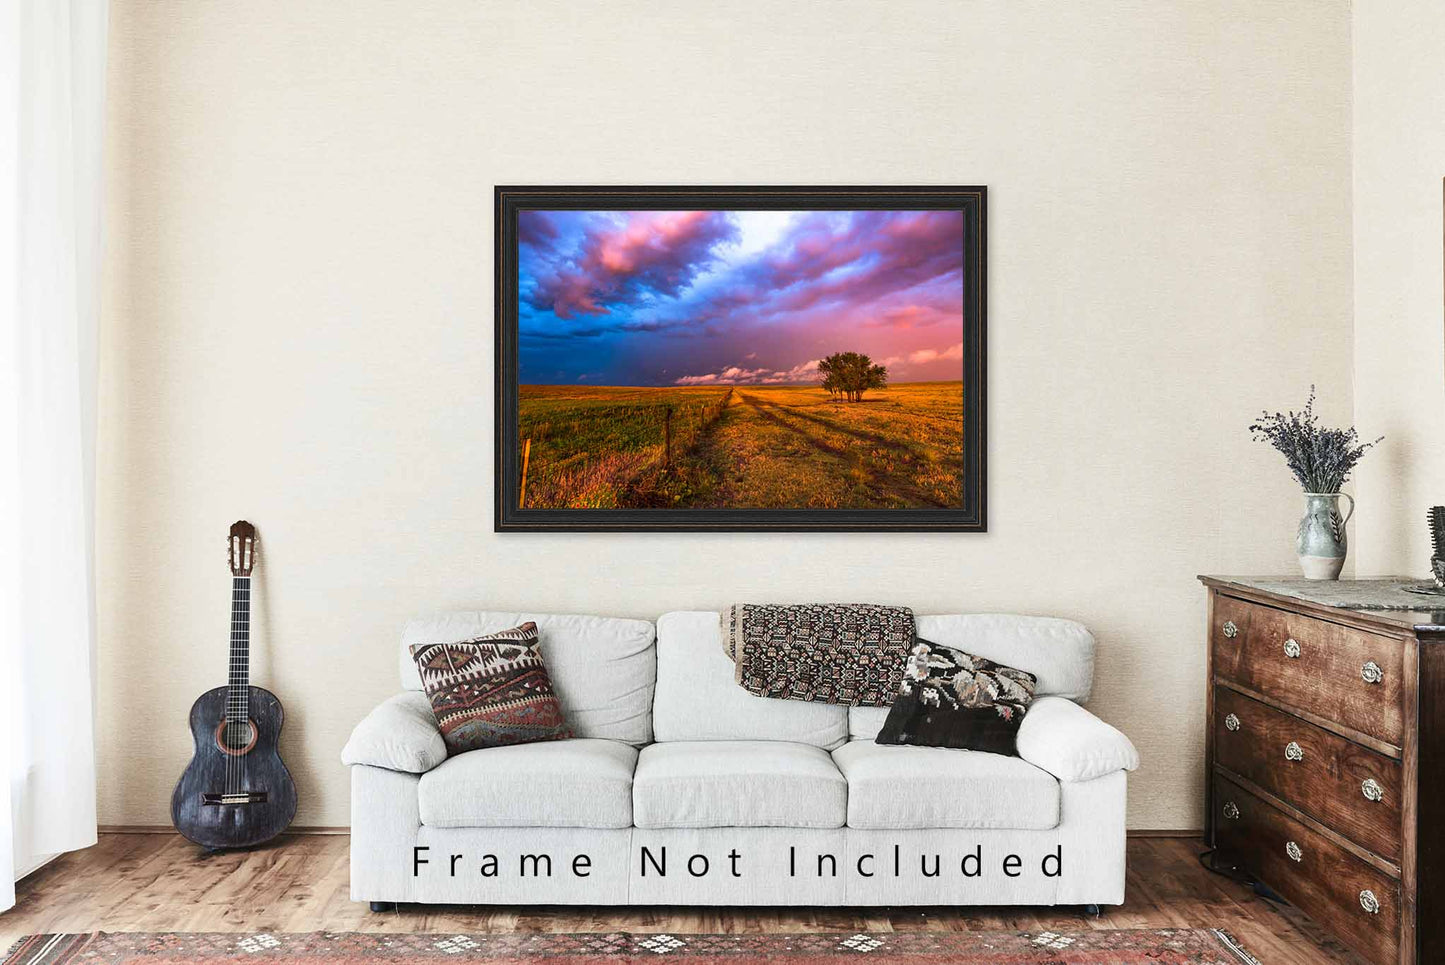 Prairie Wall Art - Picture of Trees and Fence Under Stormy Sky in Oklahoma - Western Photography Great Plains Photo Print Artwork Decor